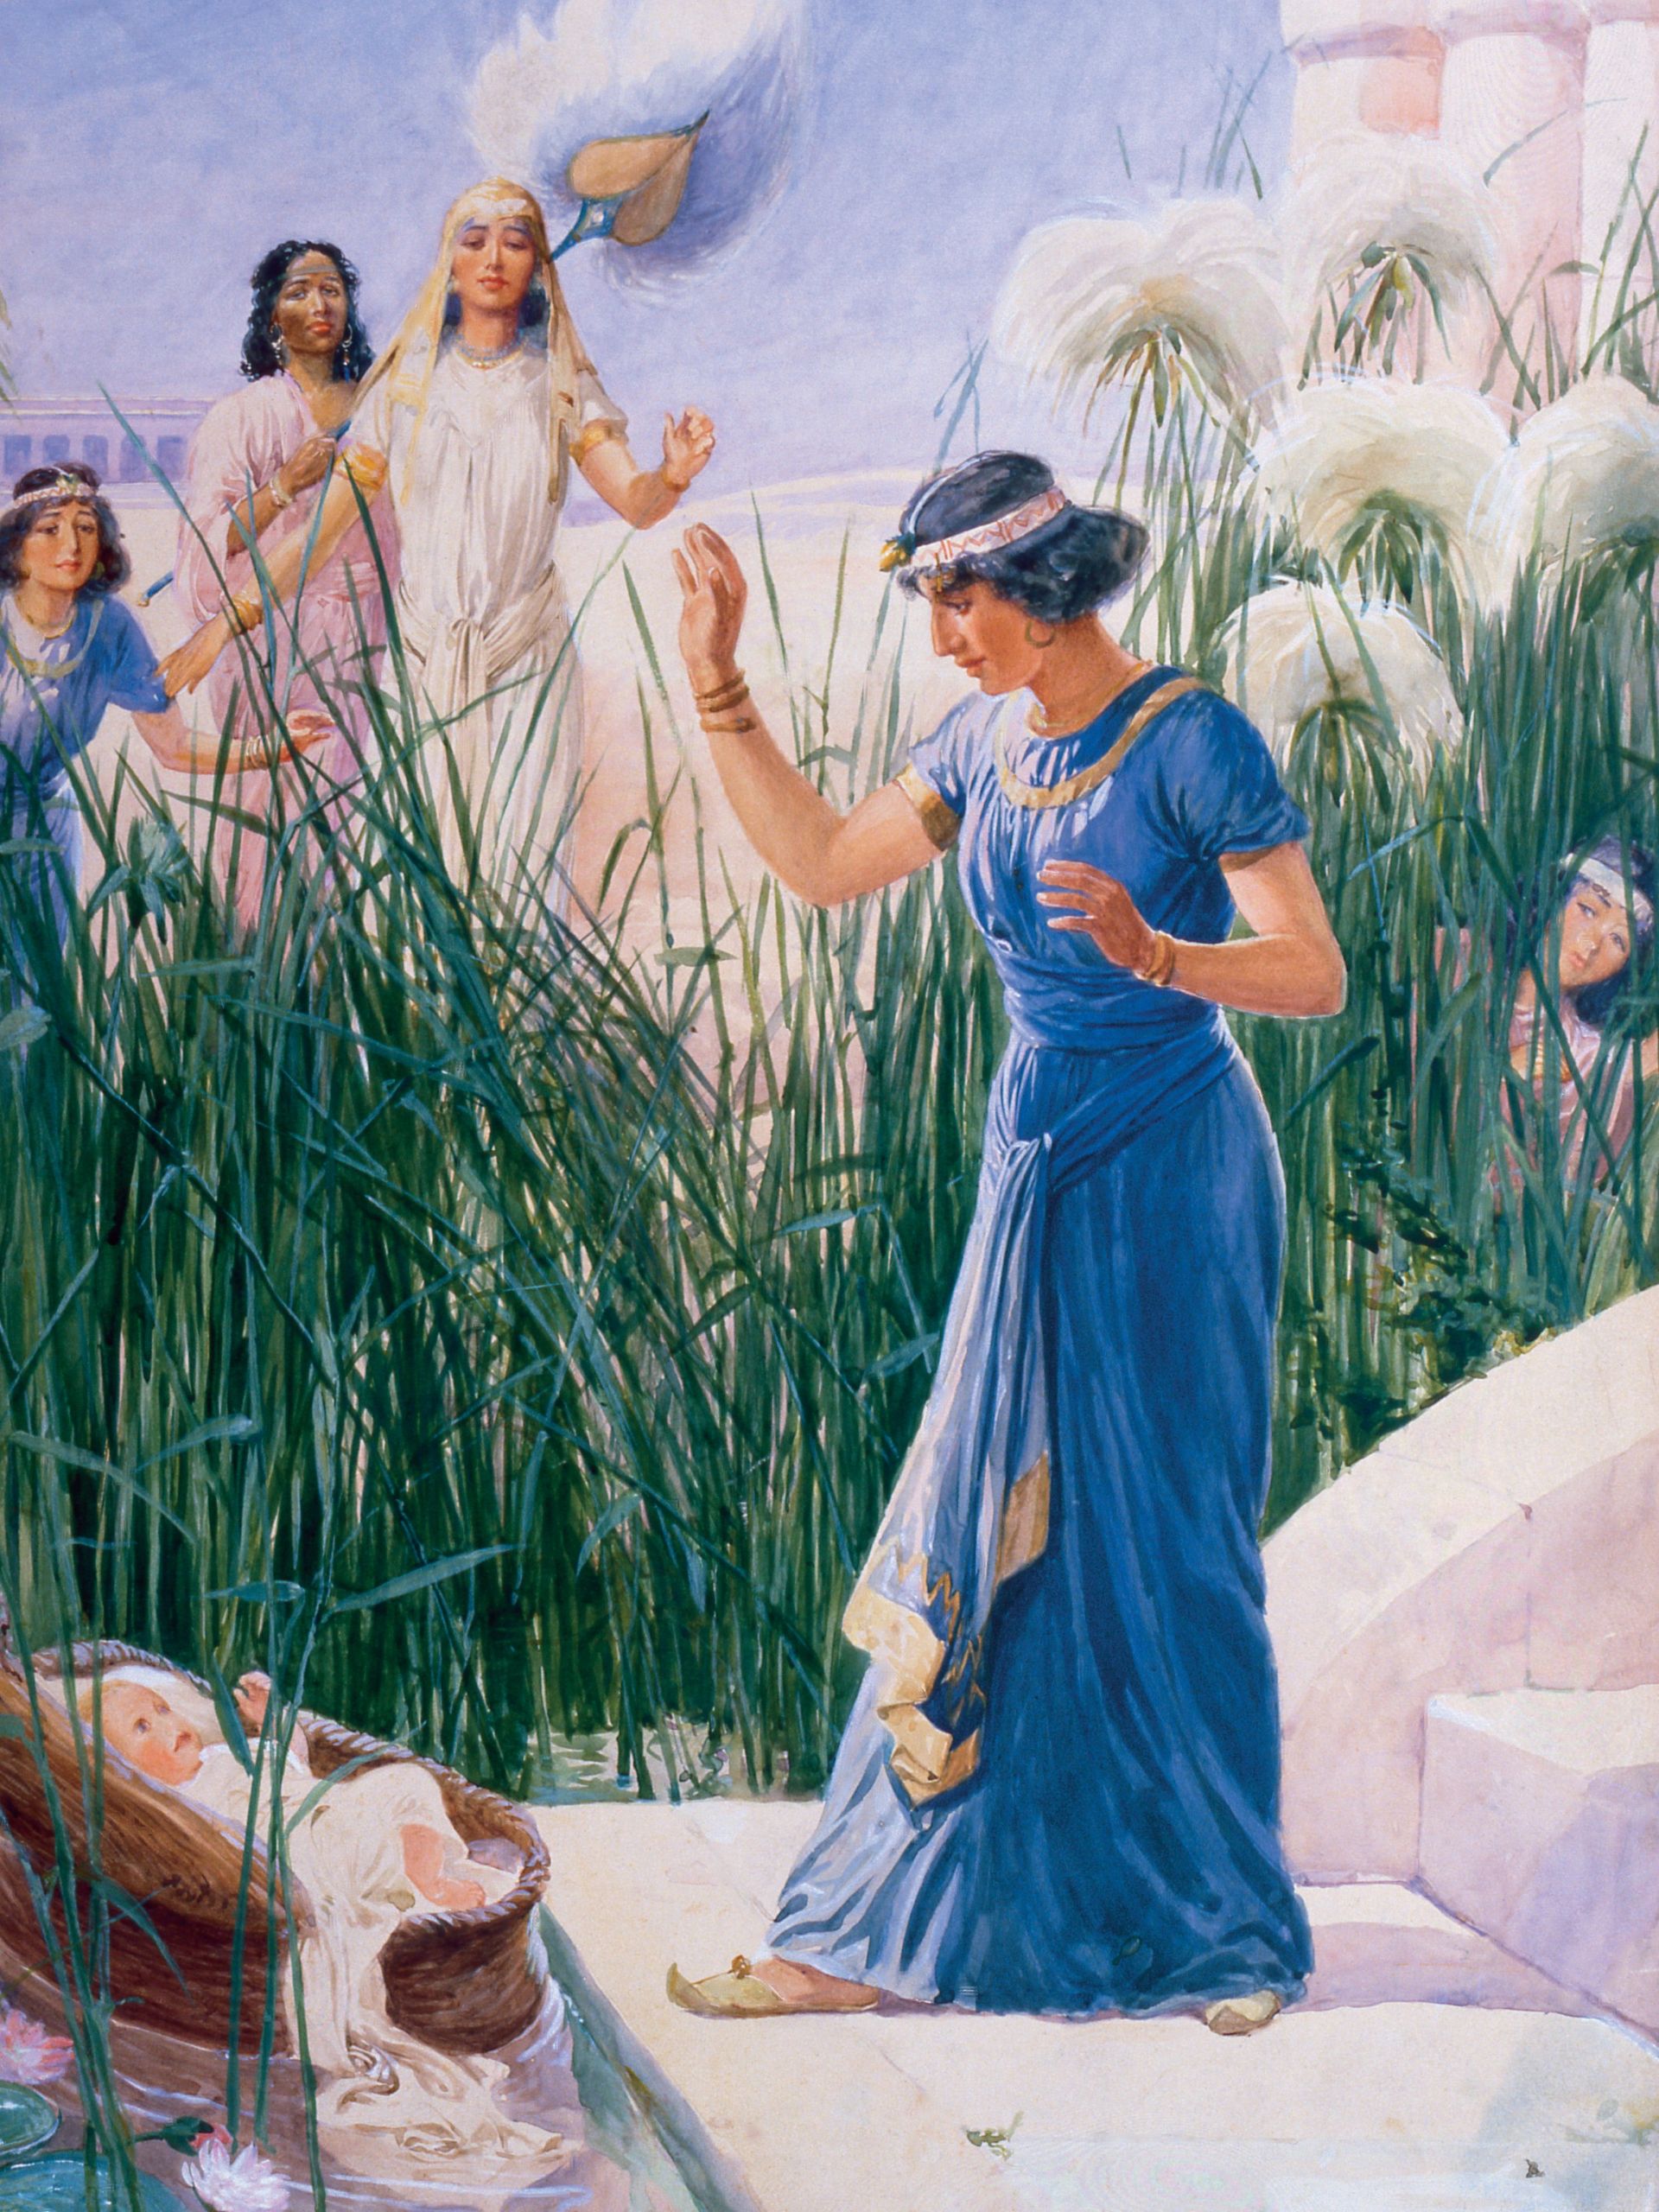 Watercolor painting of Pharaoh's daughter and her attendants finding the infant Moses in a basket in the river.